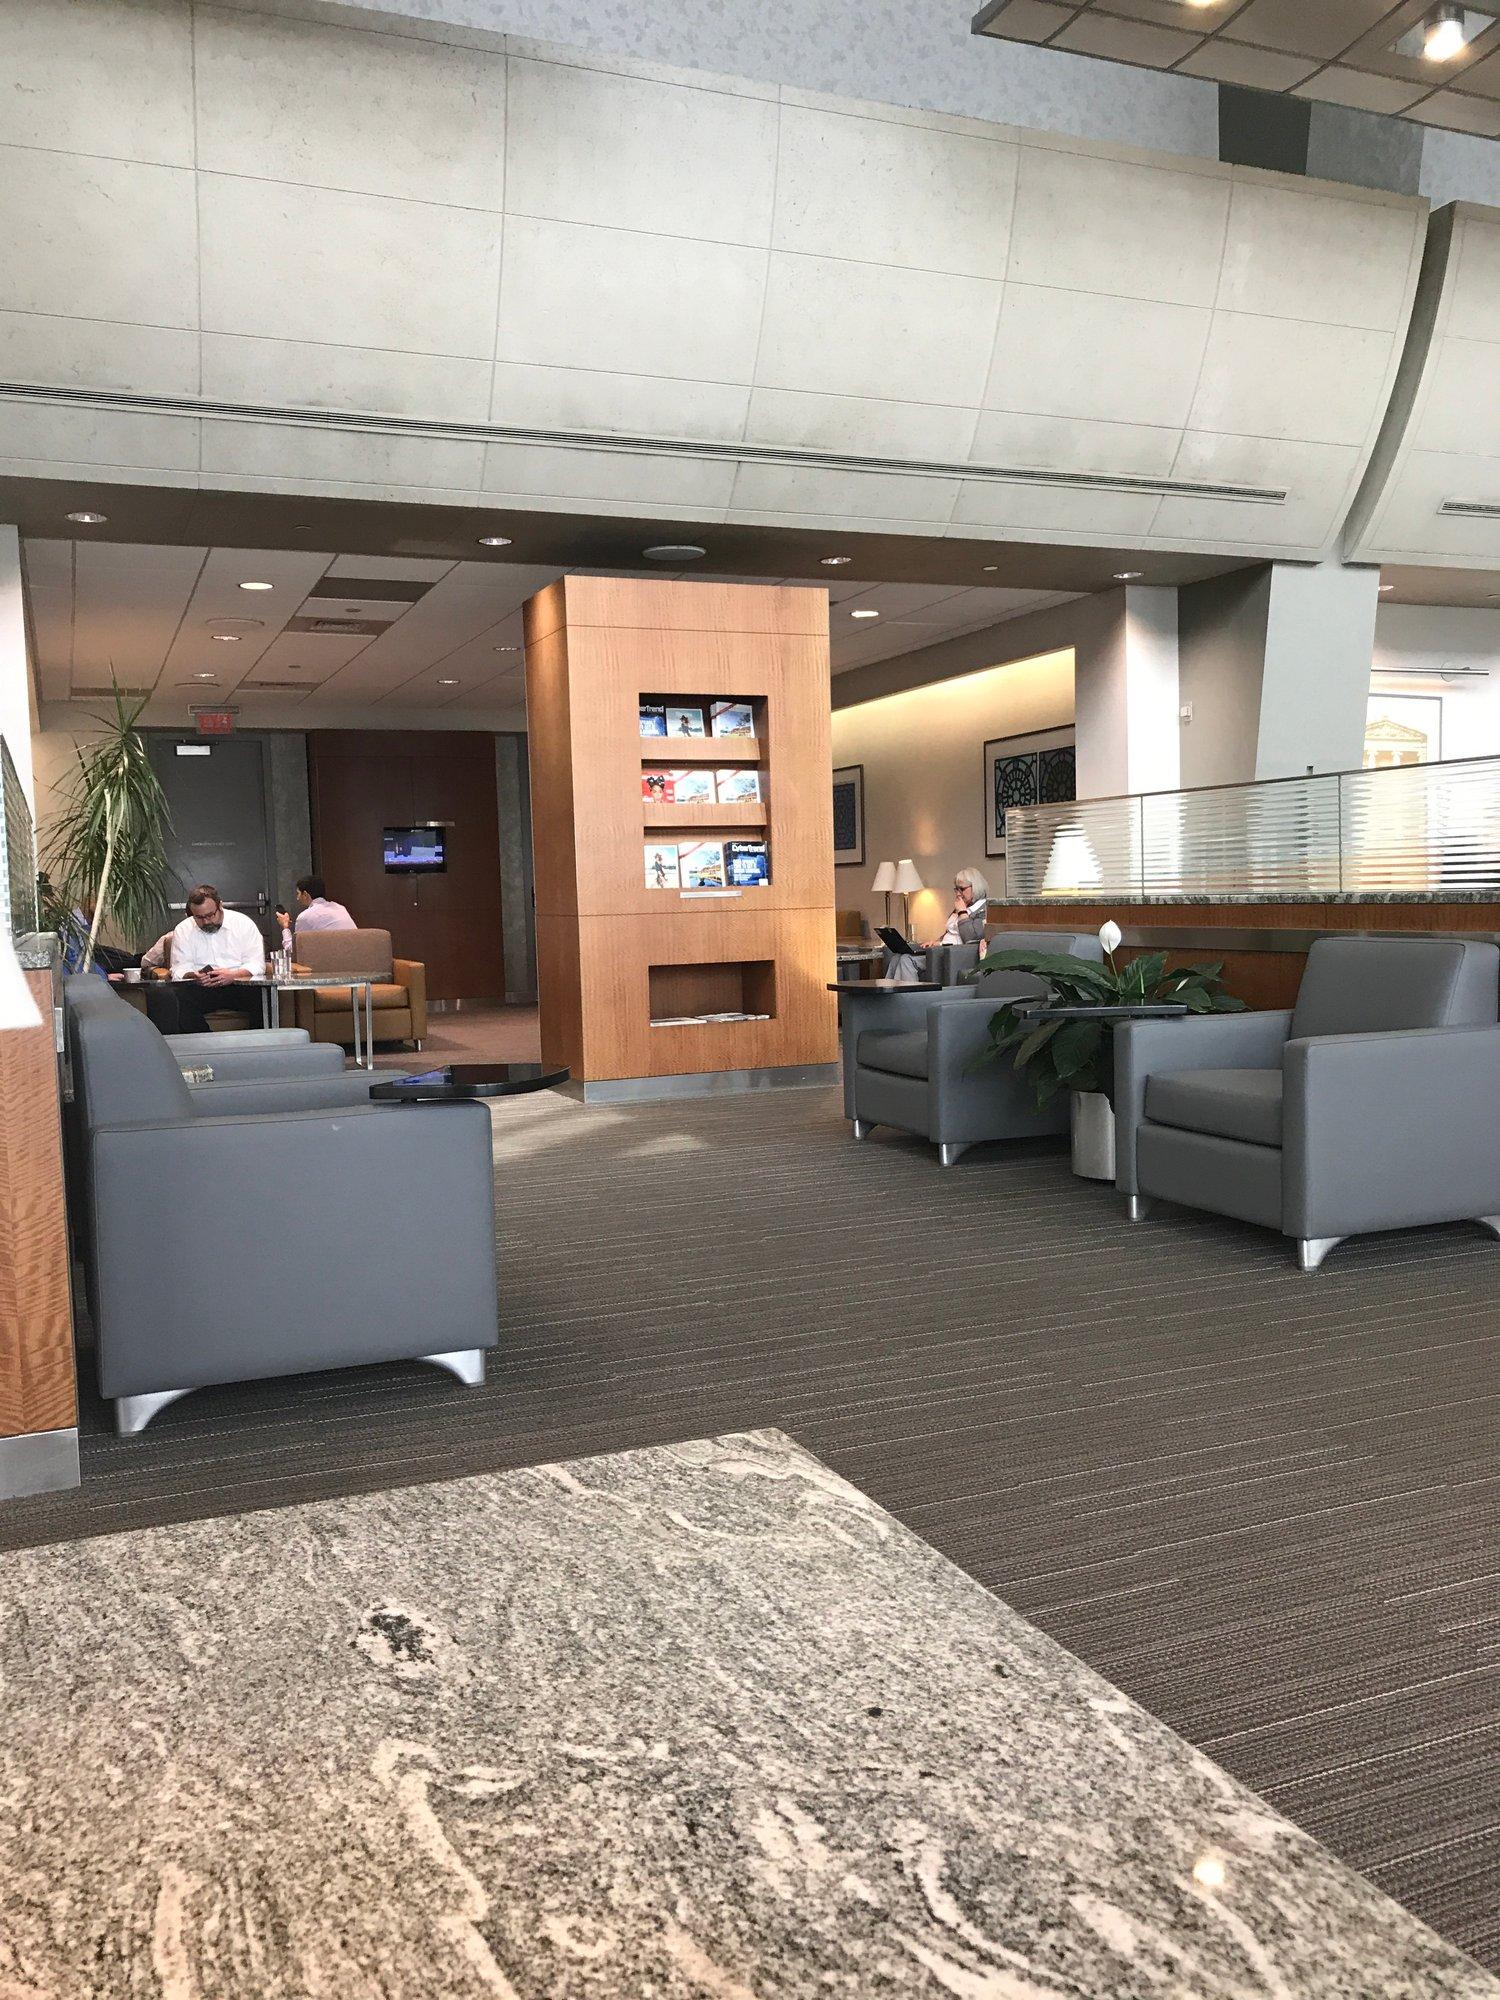 American Airlines Admirals Club image 19 of 48